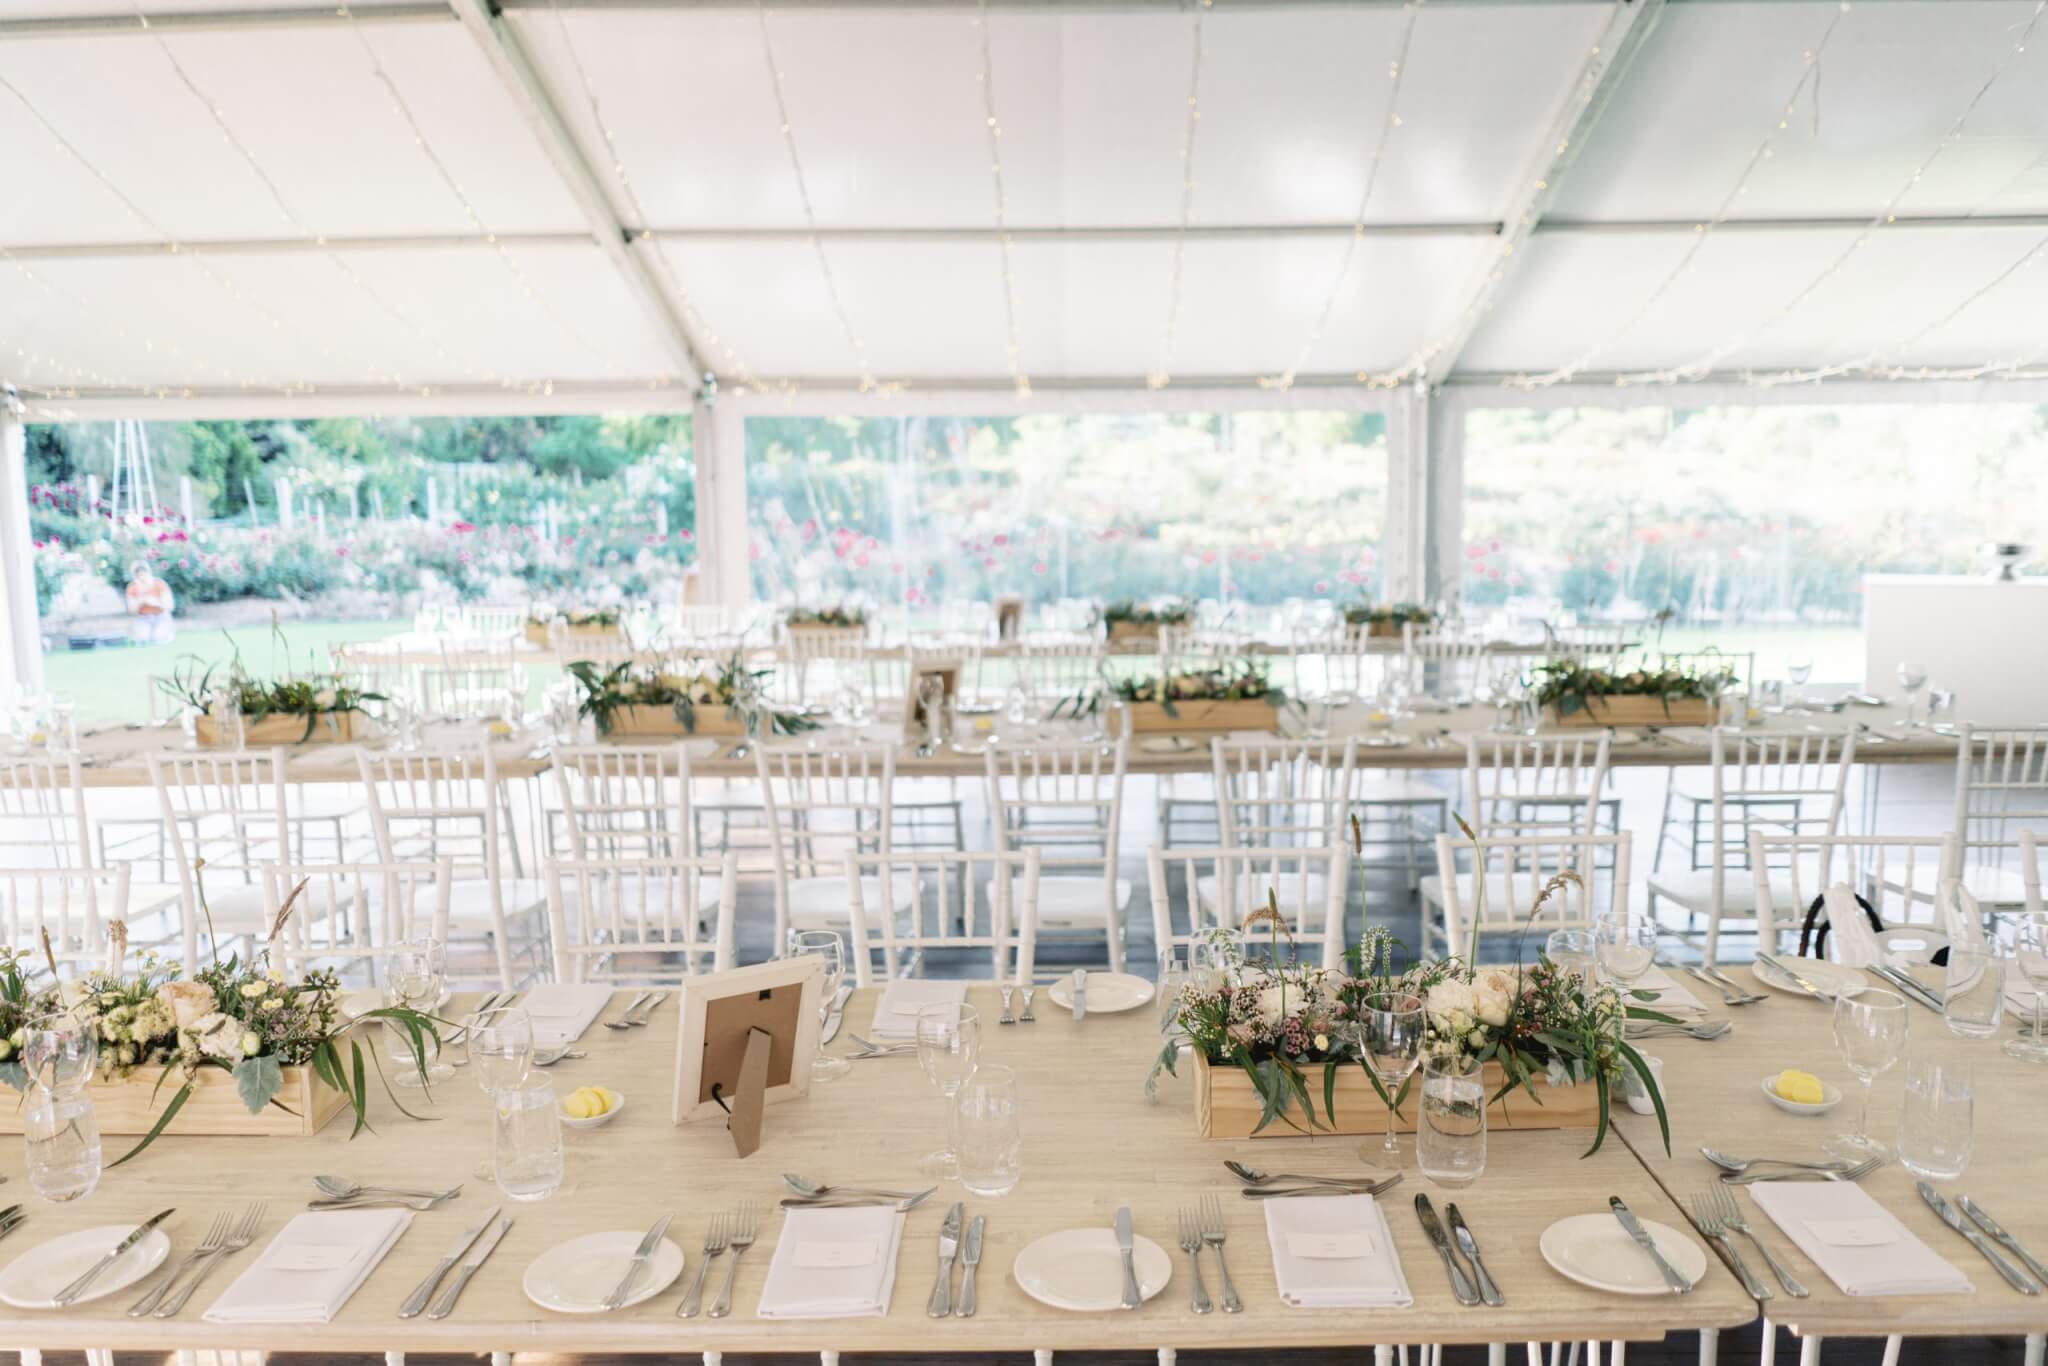 Marquee wedding at rose pavilion table